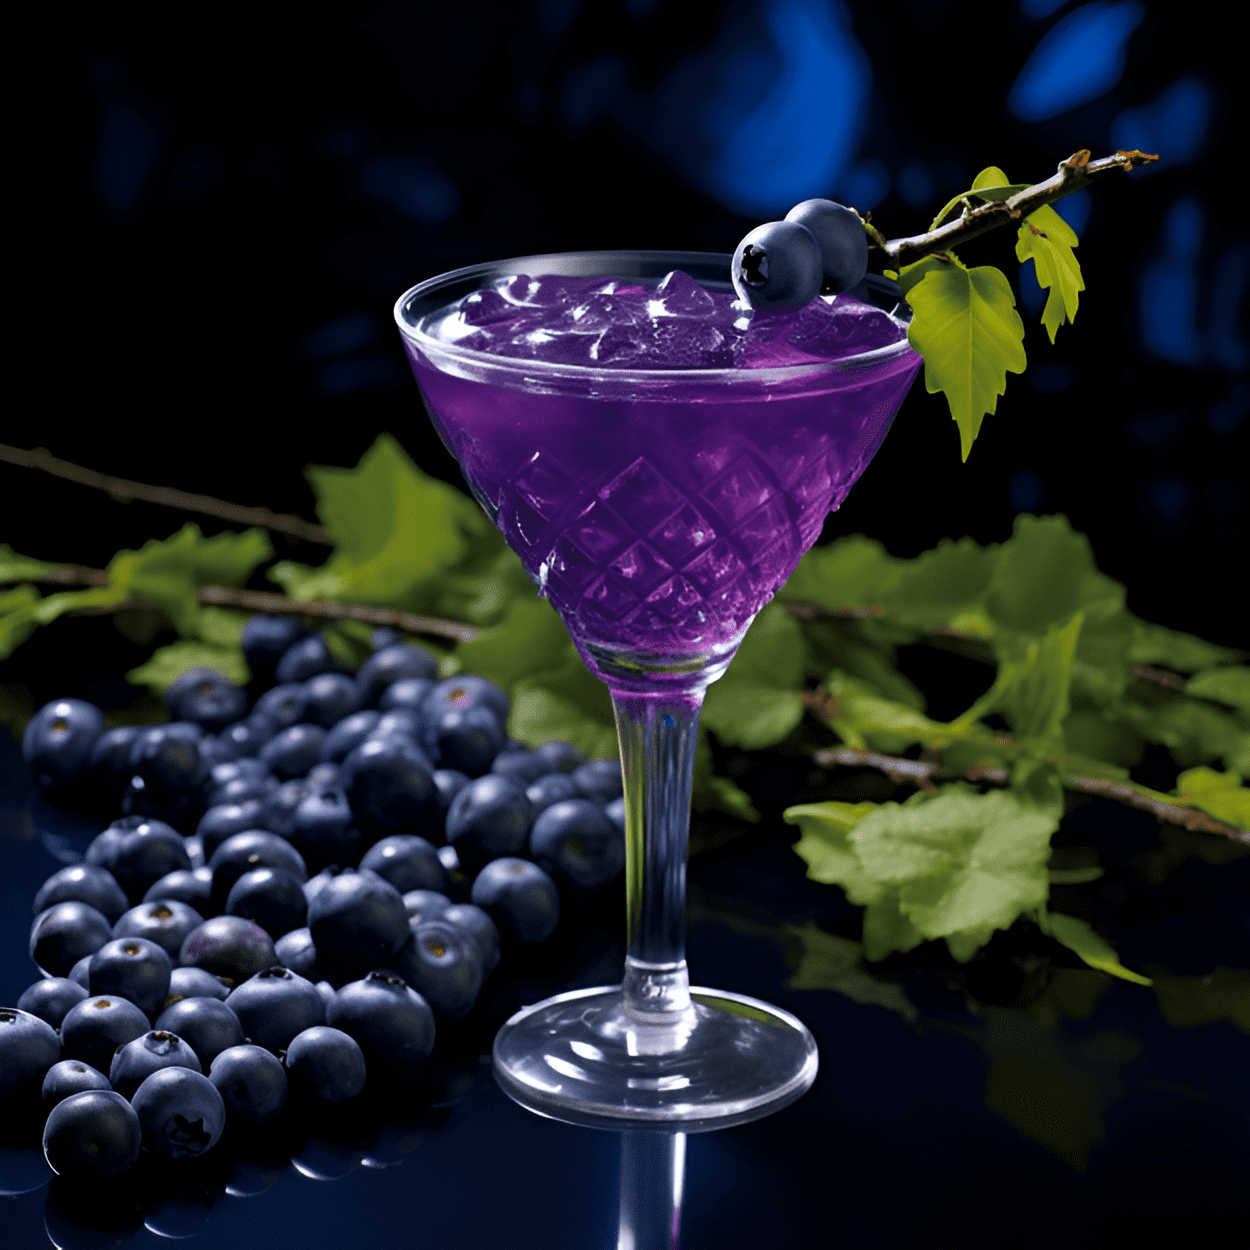 Blaberry Aviation Cocktail Recipe - The Blaberry Aviation is a delightful balance of sweet and sour. The fresh blueberries add a sweet, fruity flavor that complements the tartness of the lemon juice. The gin provides a strong, crisp base, while the maraschino liqueur and crème de violette add complexity and a subtle floral note.